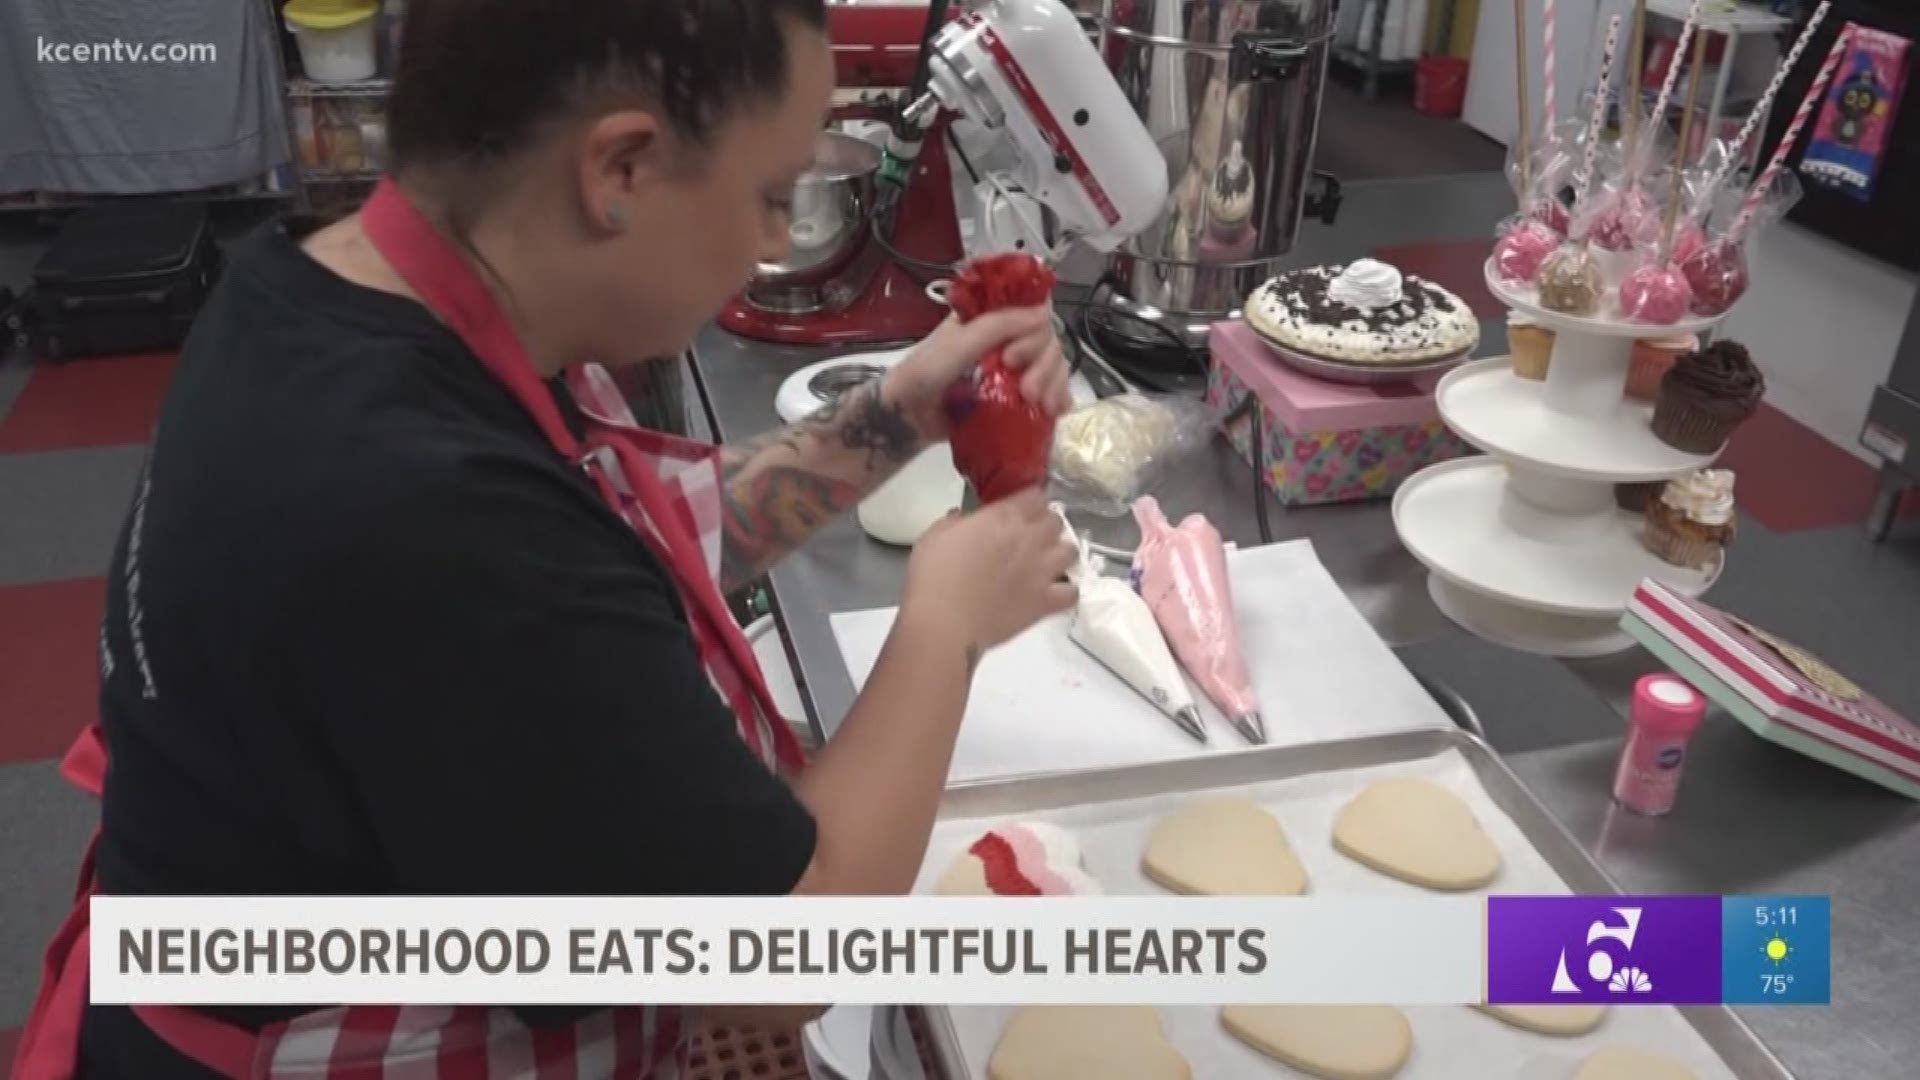 Channel 6 reporter Jamie Kennedy got a fix for his sweet tooth in this edition of Neighborhood Eats.